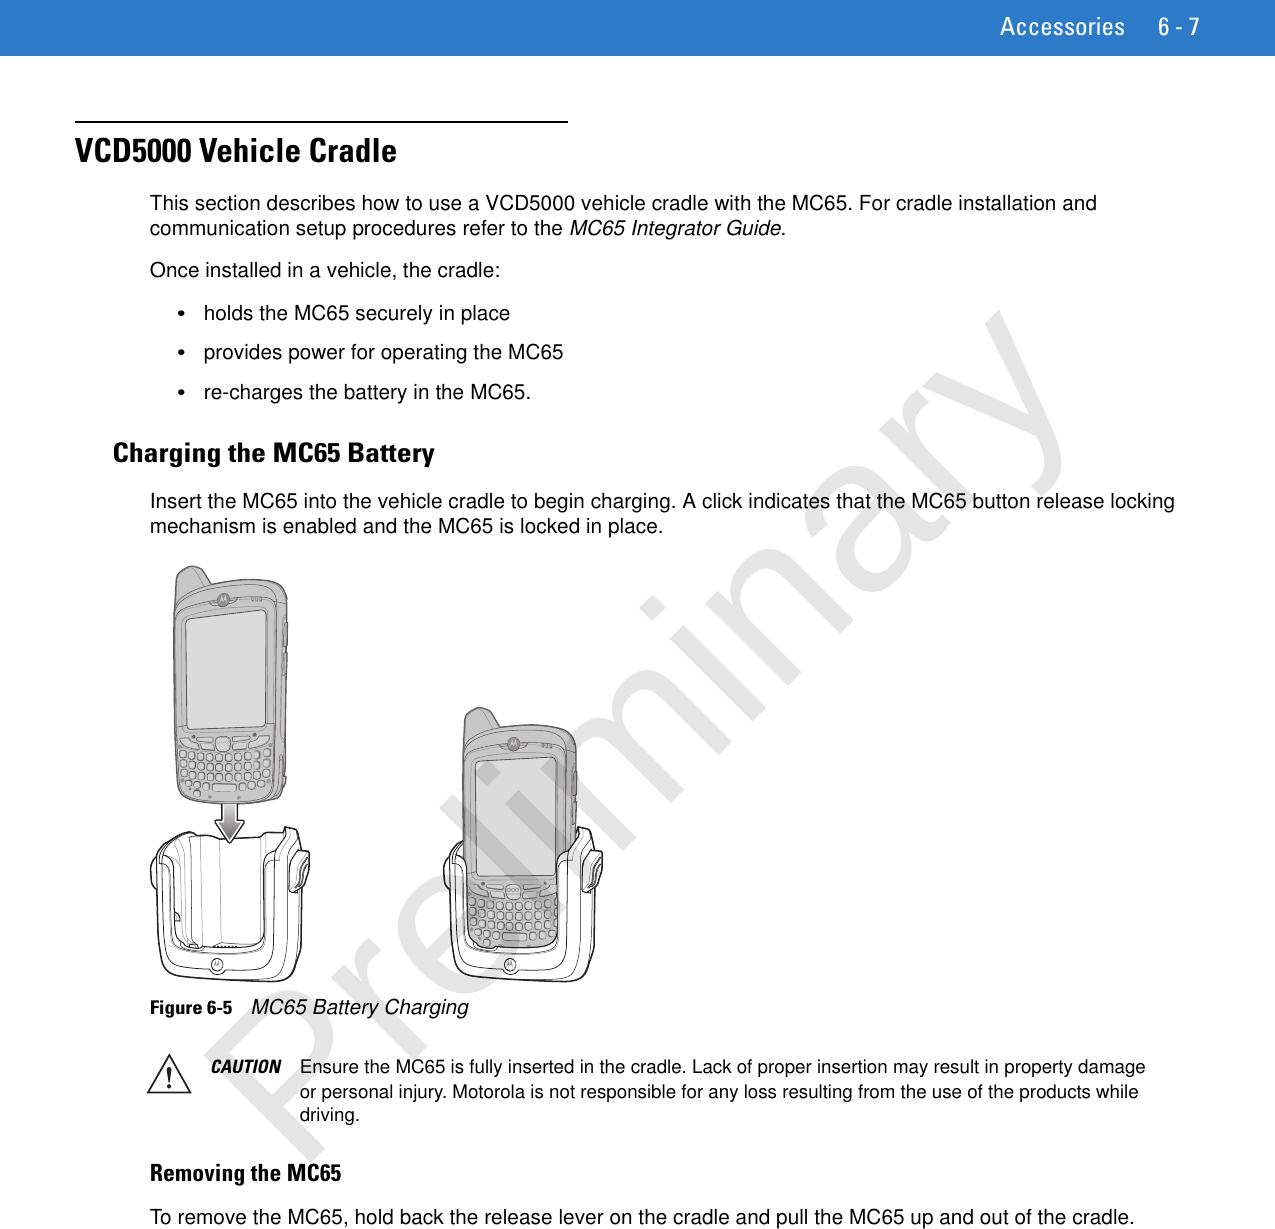 Accessories 6 - 7VCD5000 Vehicle CradleThis section describes how to use a VCD5000 vehicle cradle with the MC65. For cradle installation and communication setup procedures refer to the MC65 Integrator Guide.Once installed in a vehicle, the cradle:•holds the MC65 securely in place•provides power for operating the MC65•re-charges the battery in the MC65.Charging the MC65 BatteryInsert the MC65 into the vehicle cradle to begin charging. A click indicates that the MC65 button release locking mechanism is enabled and the MC65 is locked in place.Figure 6-5    MC65 Battery Charging Removing the MC65To remove the MC65, hold back the release lever on the cradle and pull the MC65 up and out of the cradle.CAUTION Ensure the MC65 is fully inserted in the cradle. Lack of proper insertion may result in property damage or personal injury. Motorola is not responsible for any loss resulting from the use of the products while driving. Preliminary